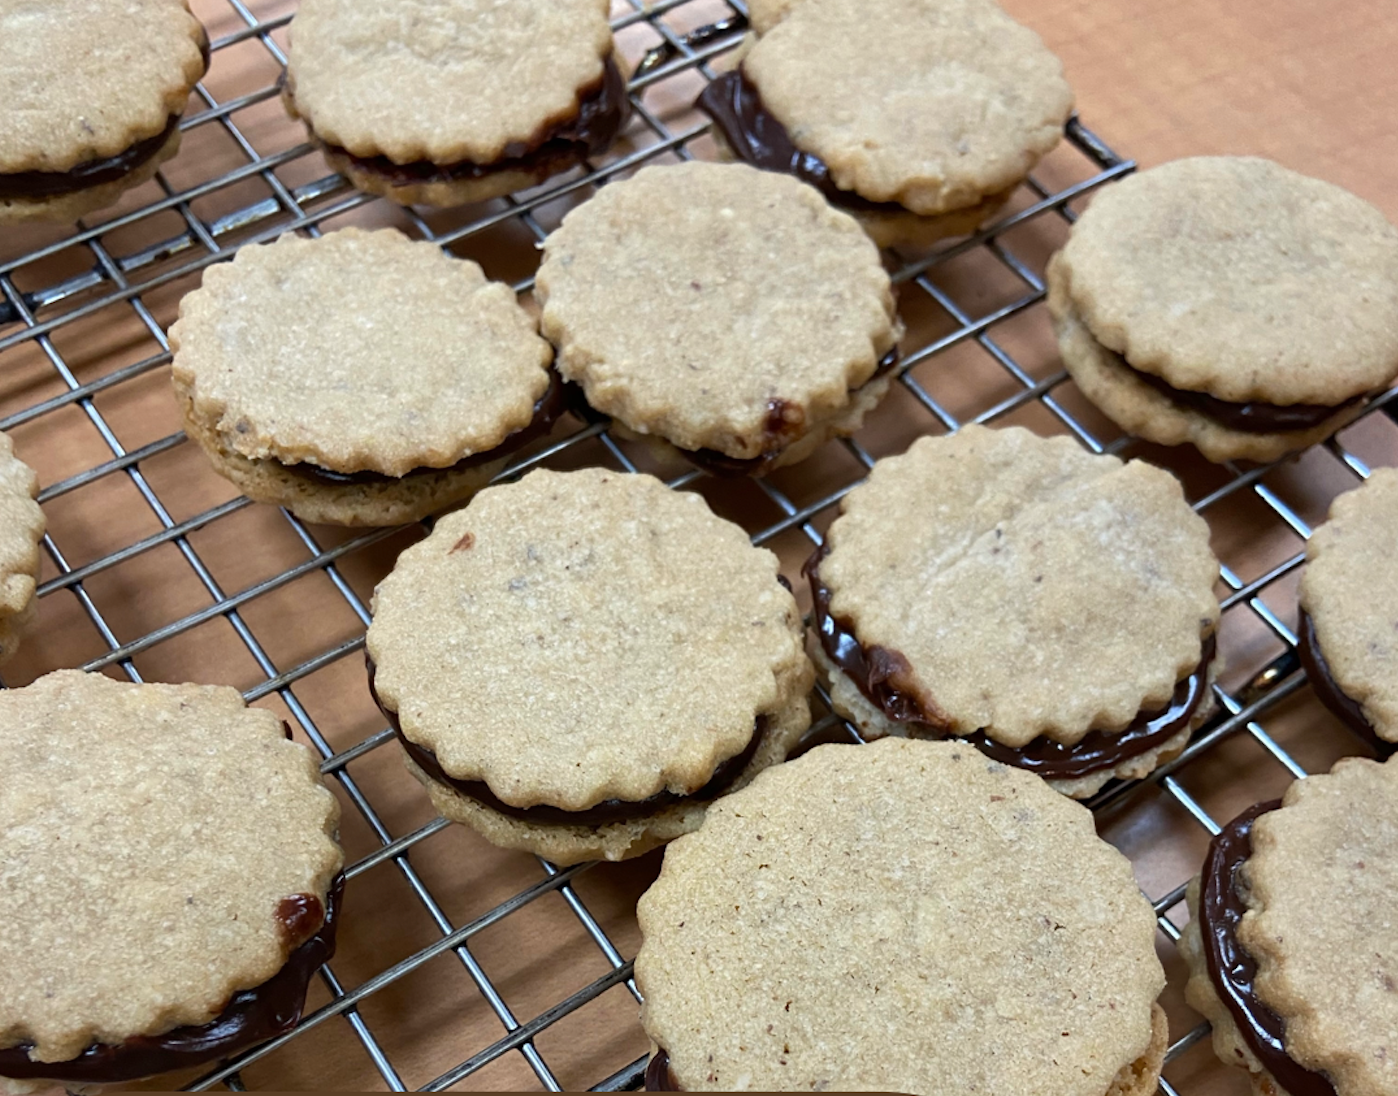 Holiday Cookie Baking Must Haves with recipes! - Gwin's Tiny Kitchen